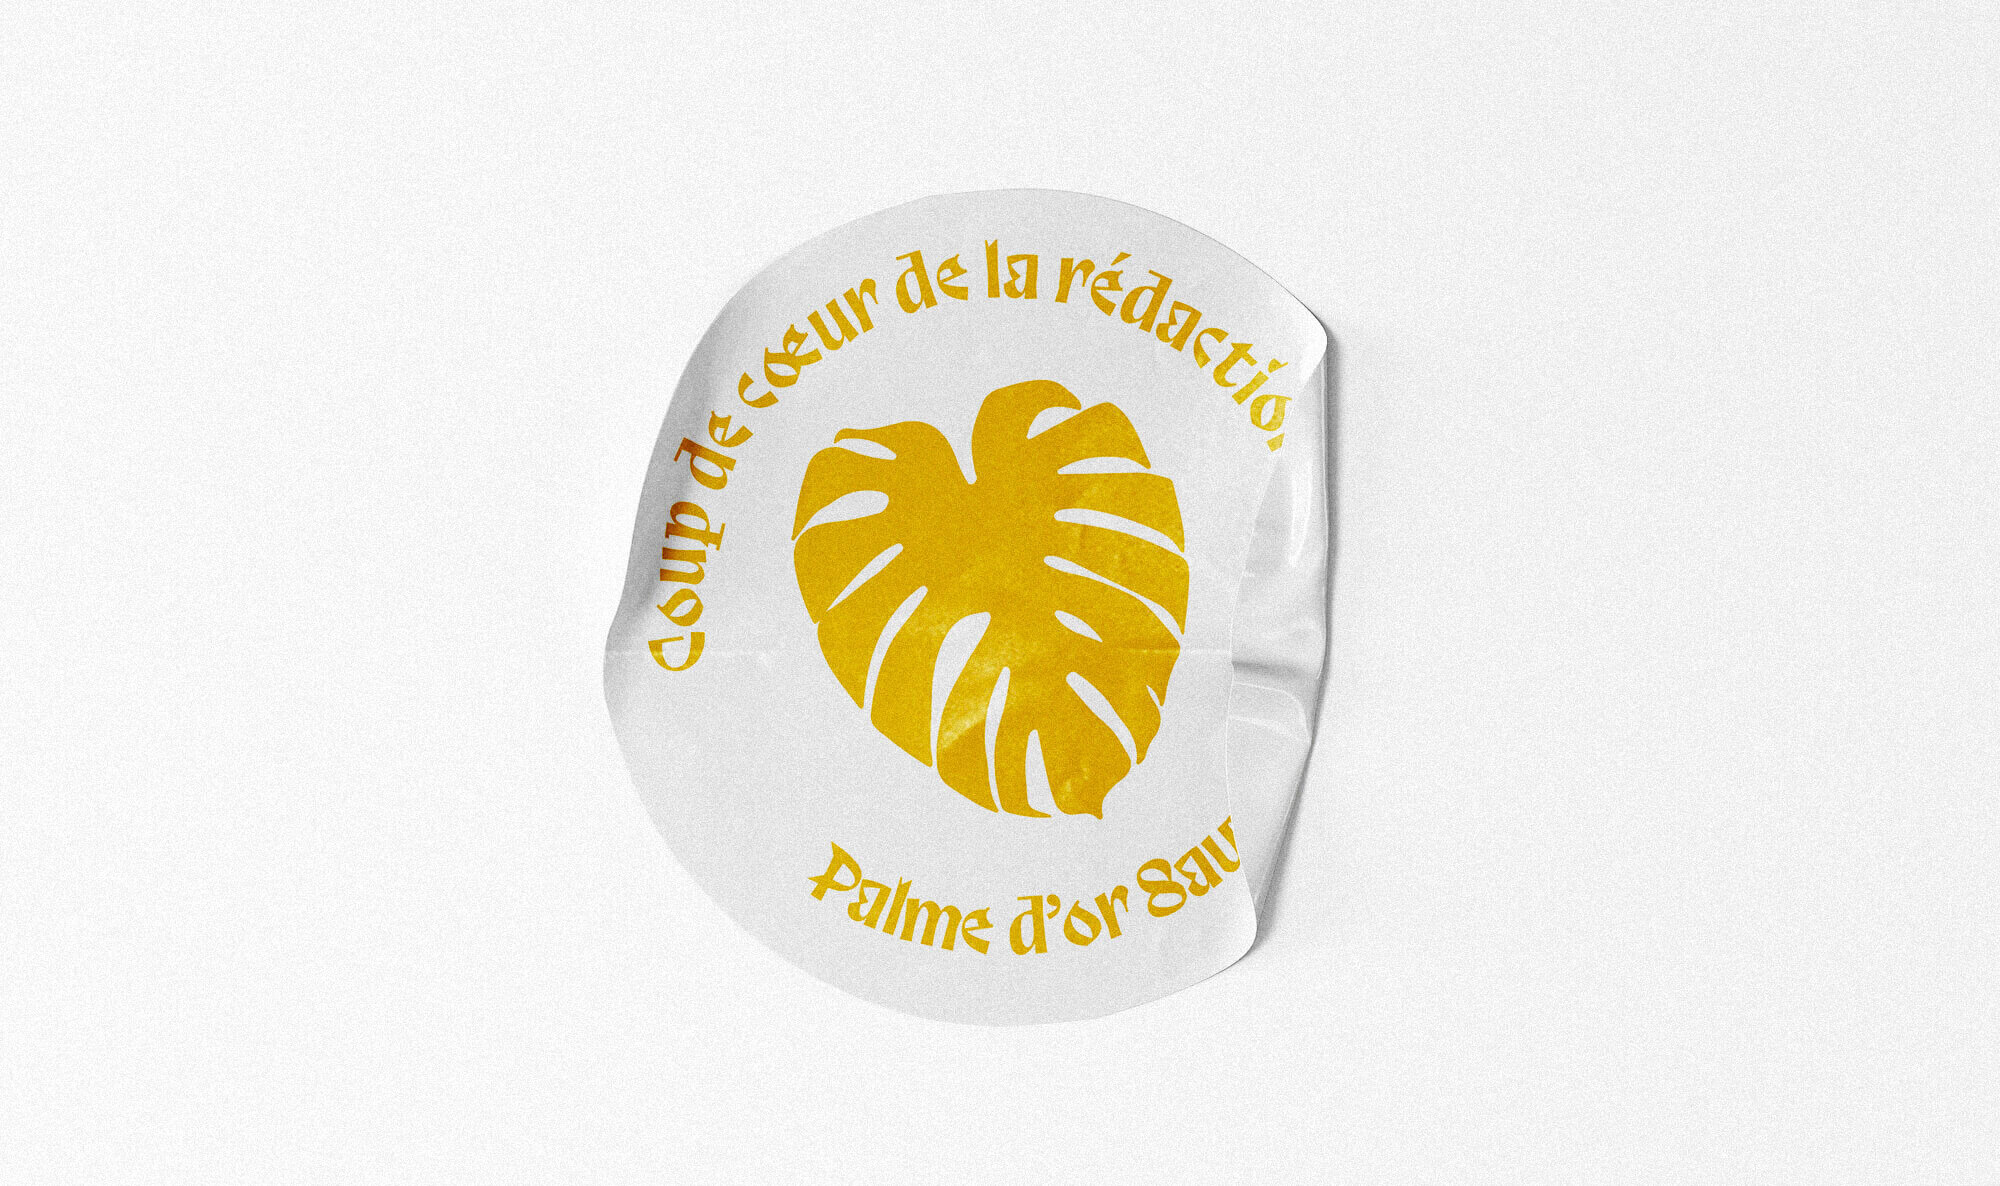 Sticker Mockup Cultures sauvages